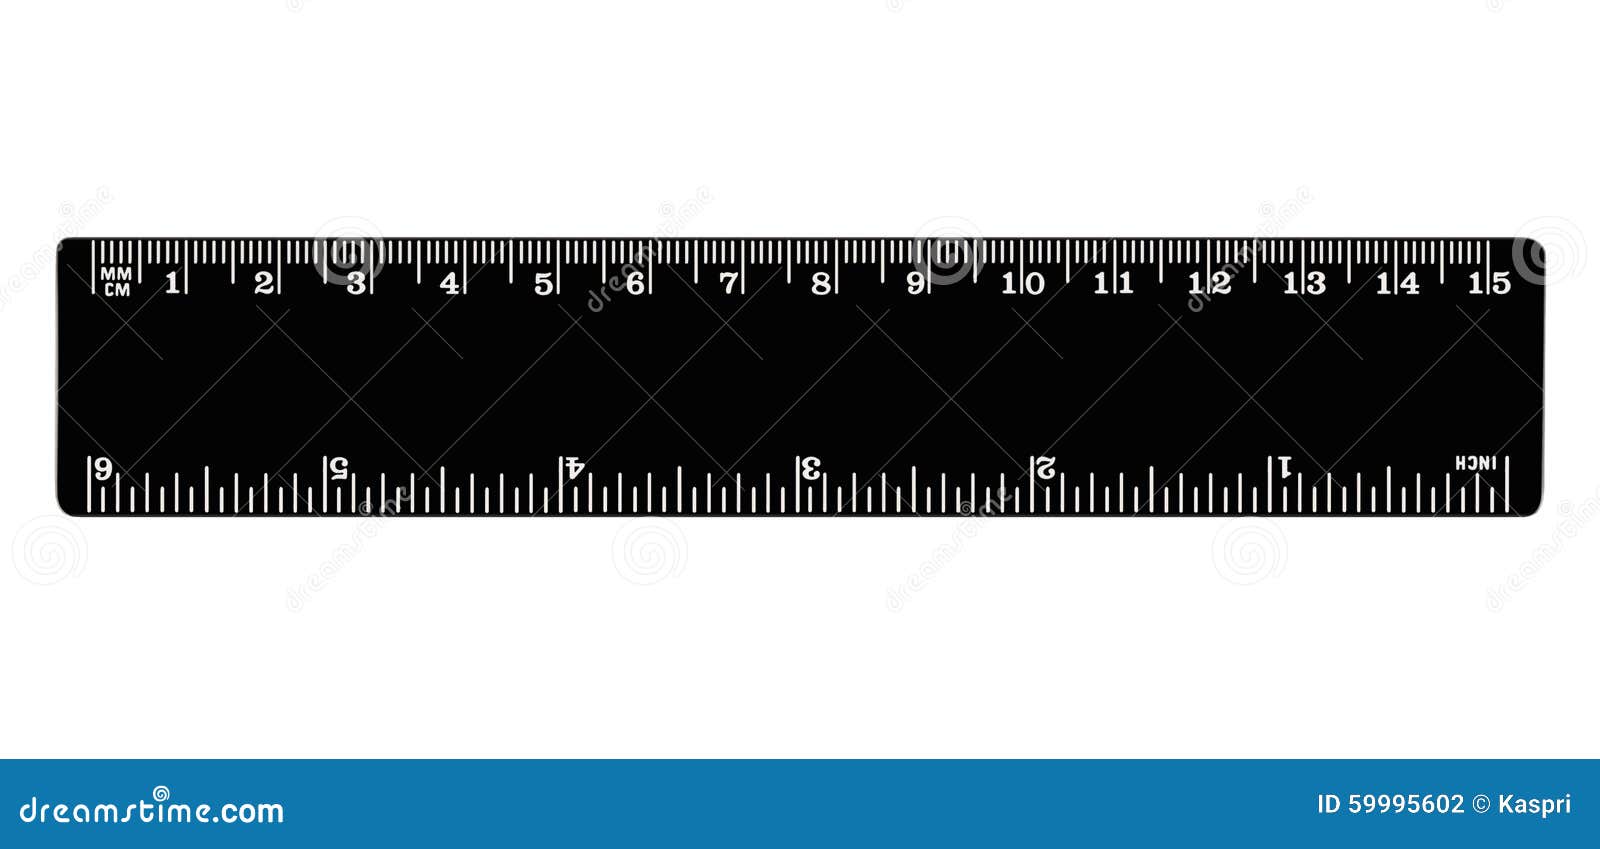 Printable Ruler - Free Accurate Ruler Inches, CM, MM